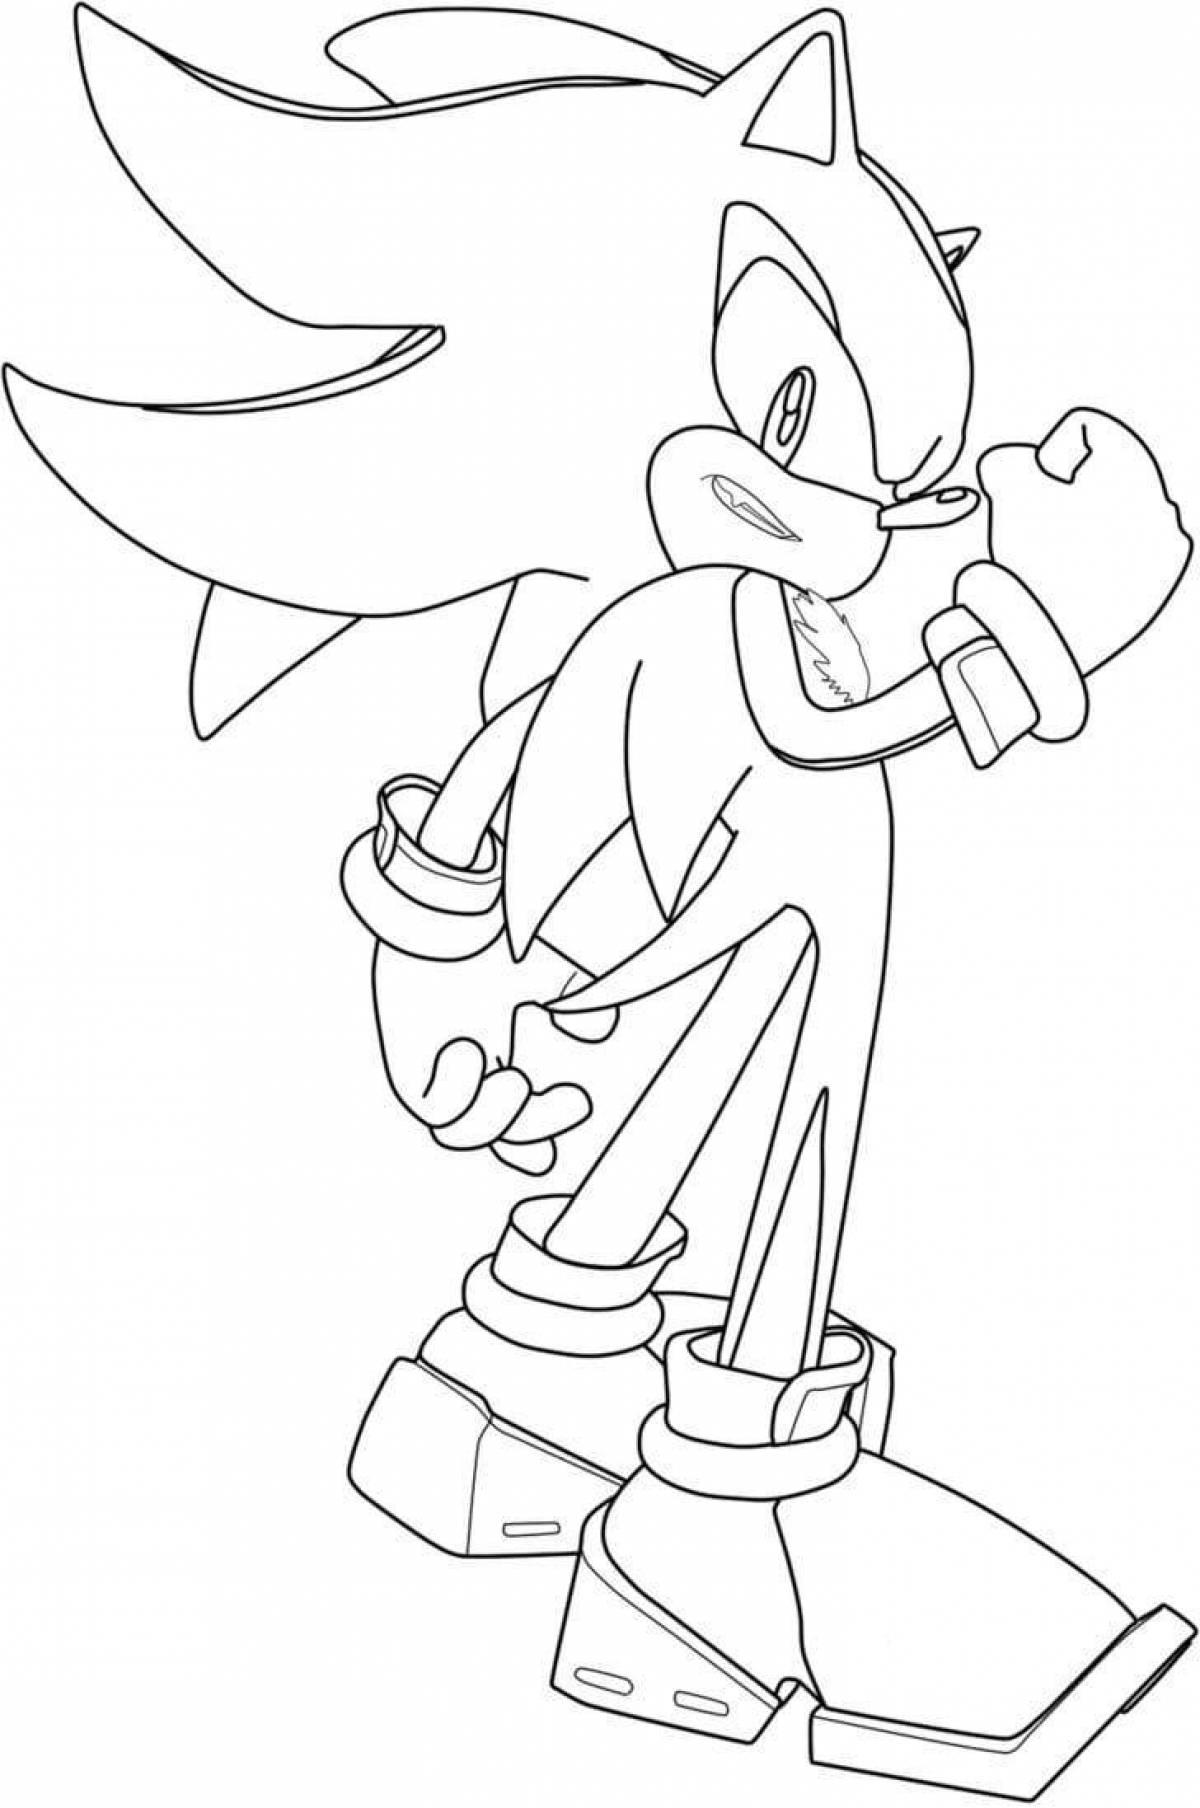 Exquisite dark sonic coloring page